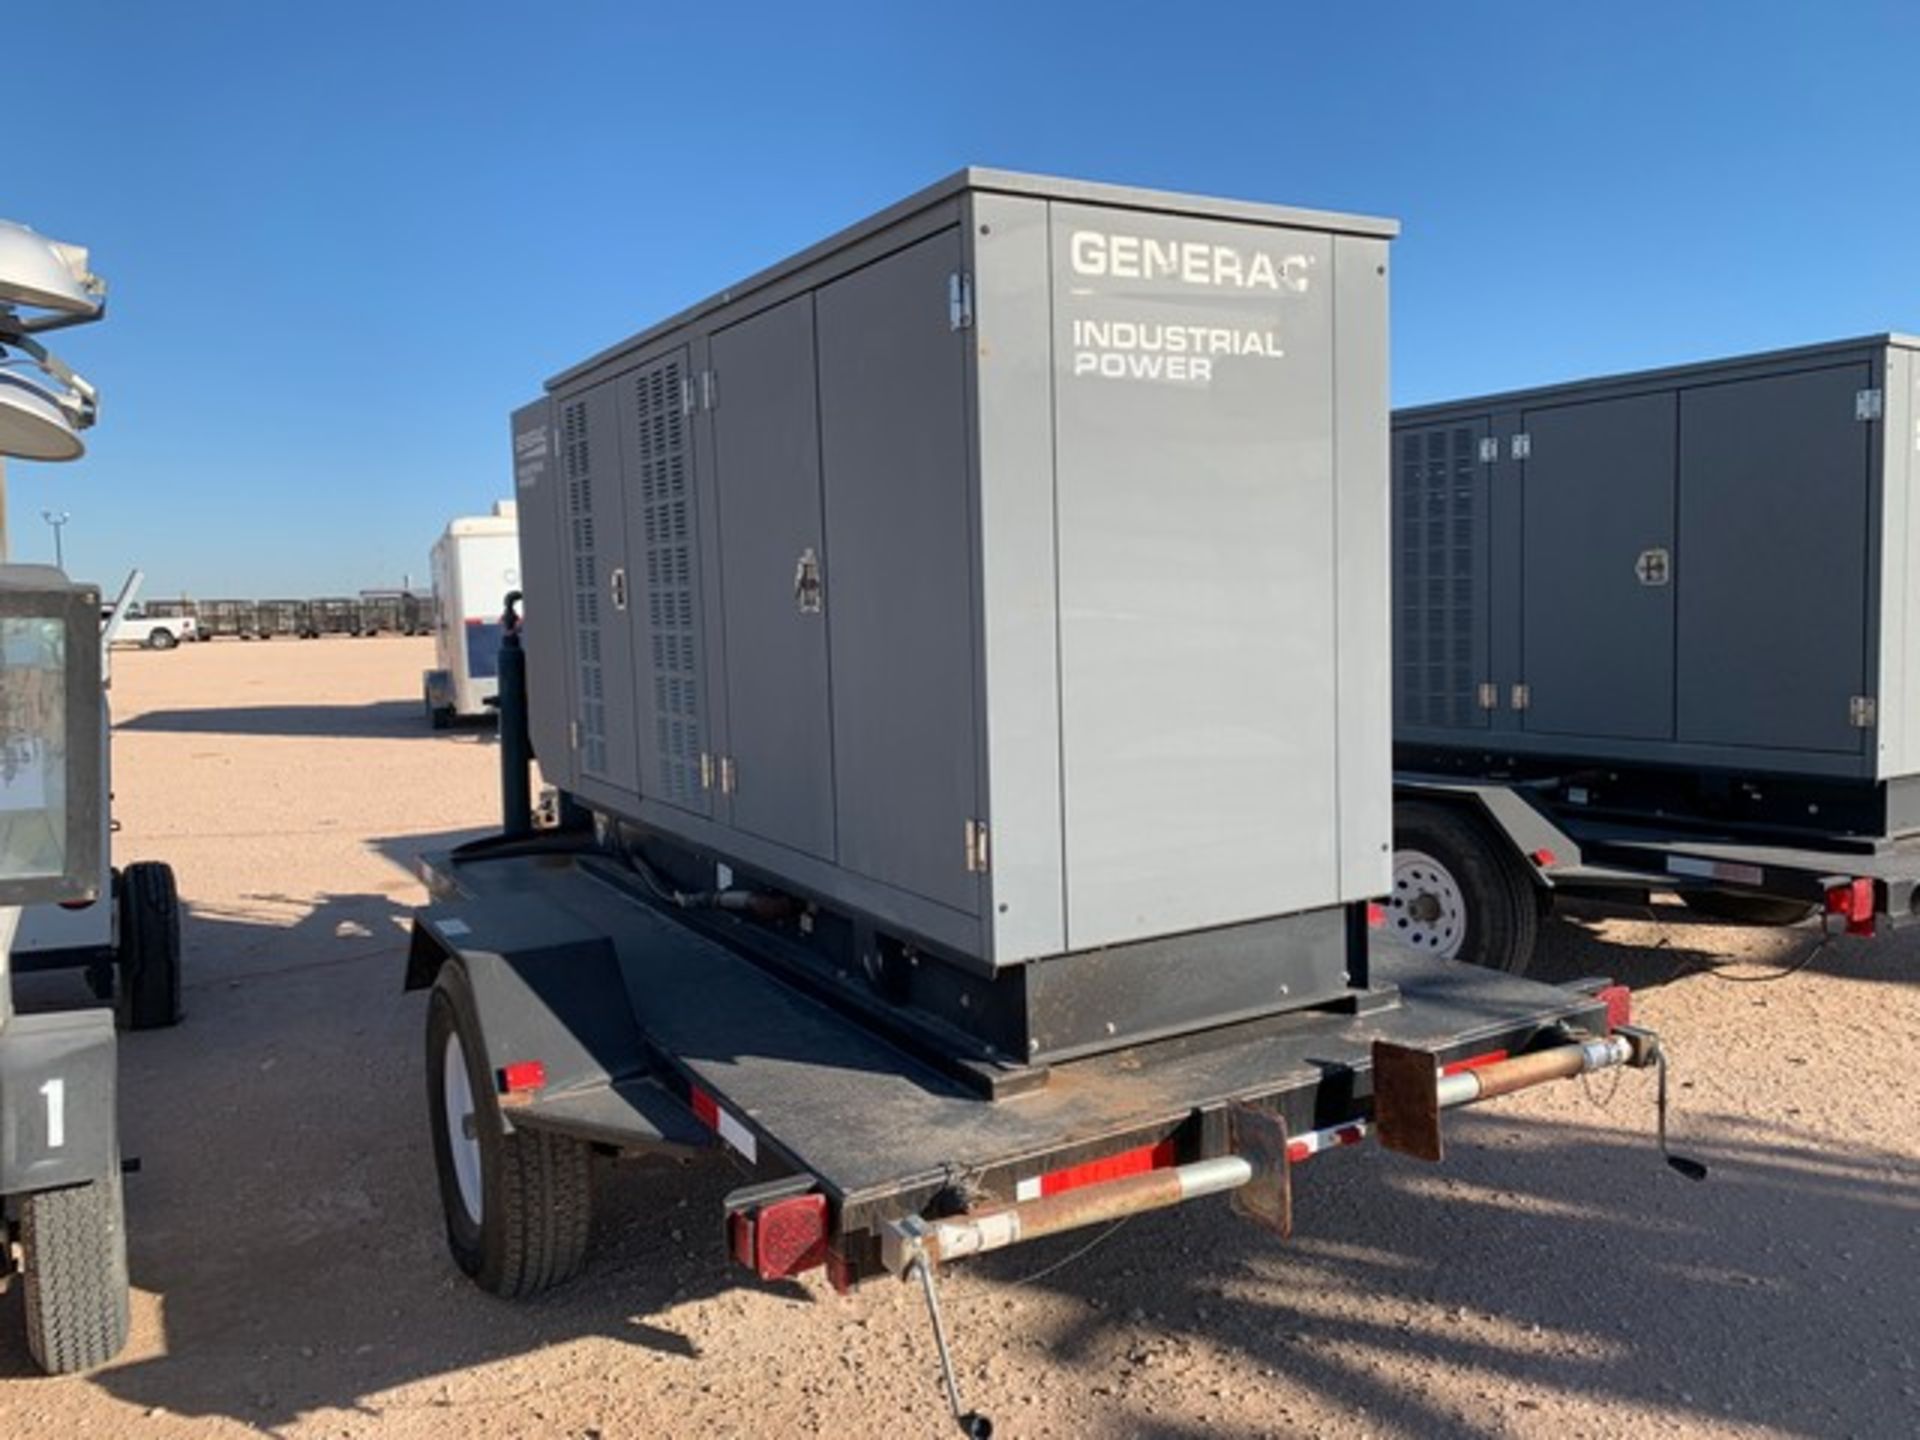 Located in YARD 1 - Midland, TX (2940) 2013 GENERAC INDUSTRIAL POWER 130 KW, 277/480V 3 PHASE - Image 4 of 4